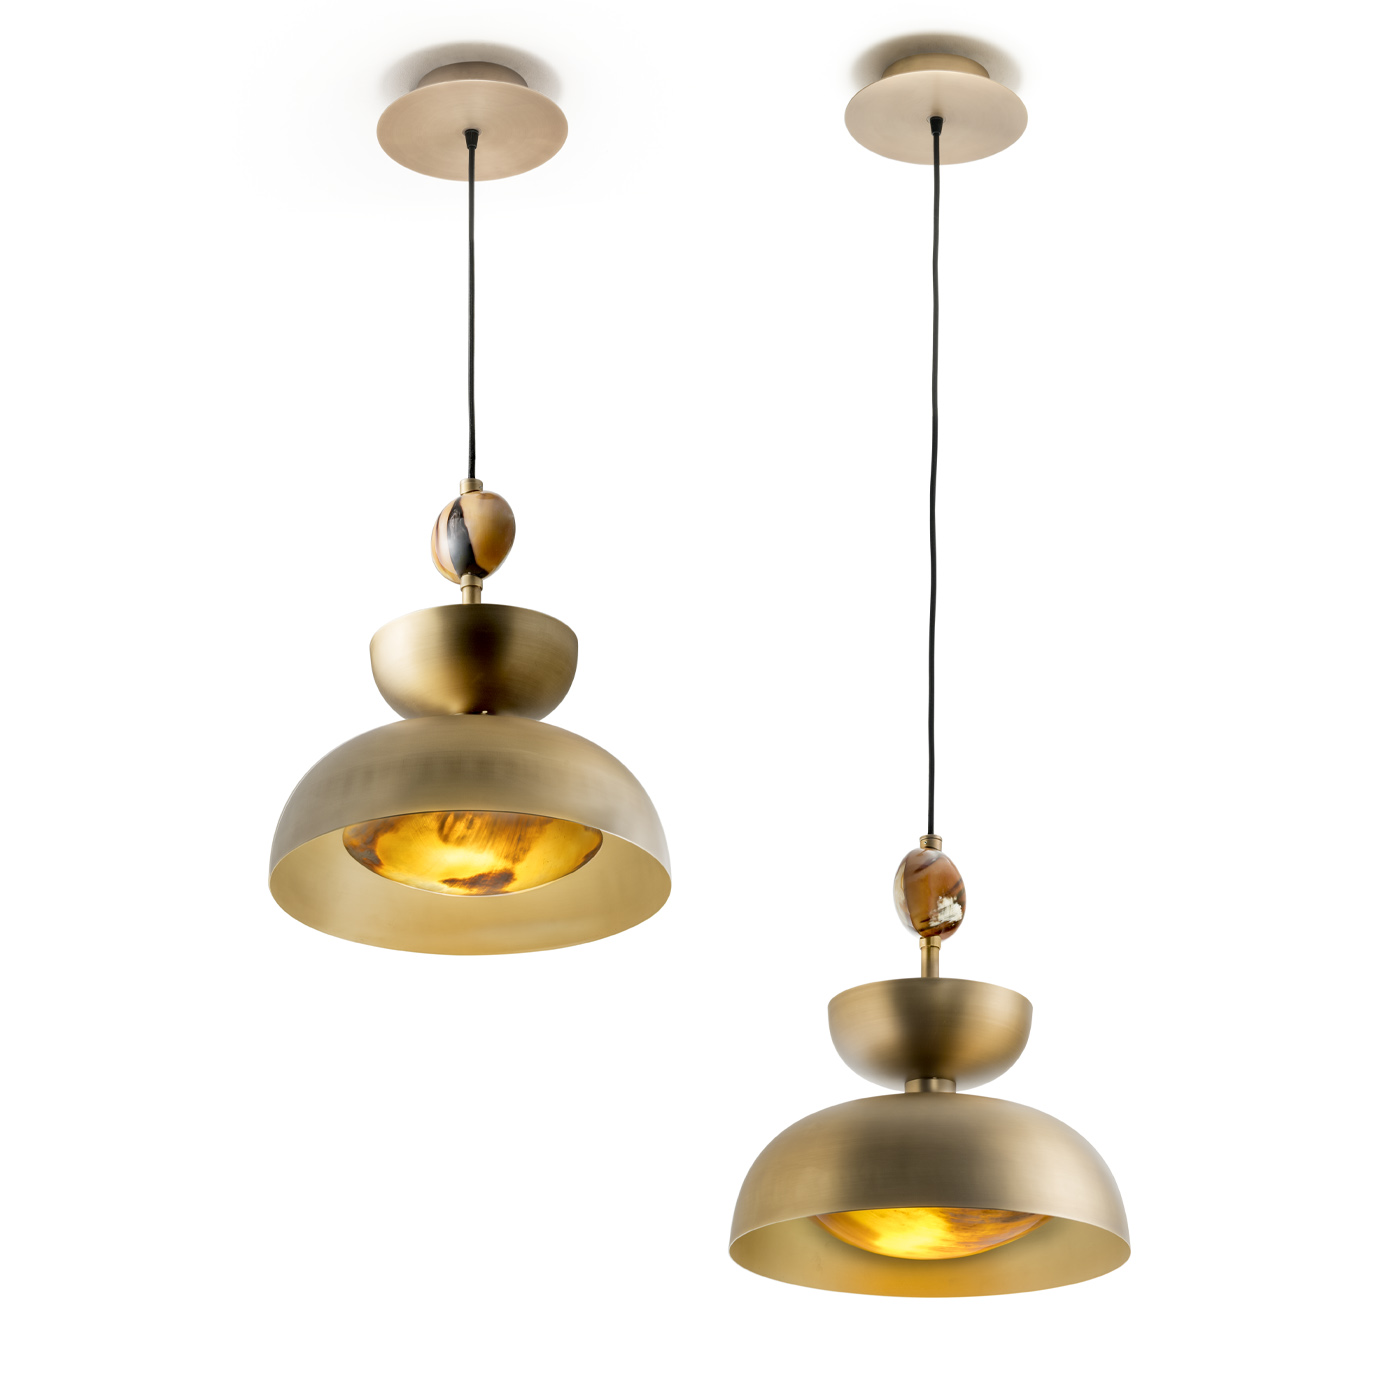 Lamps - Vesuvio suspension lamp in horn and satin brass - detail - Arcahorn